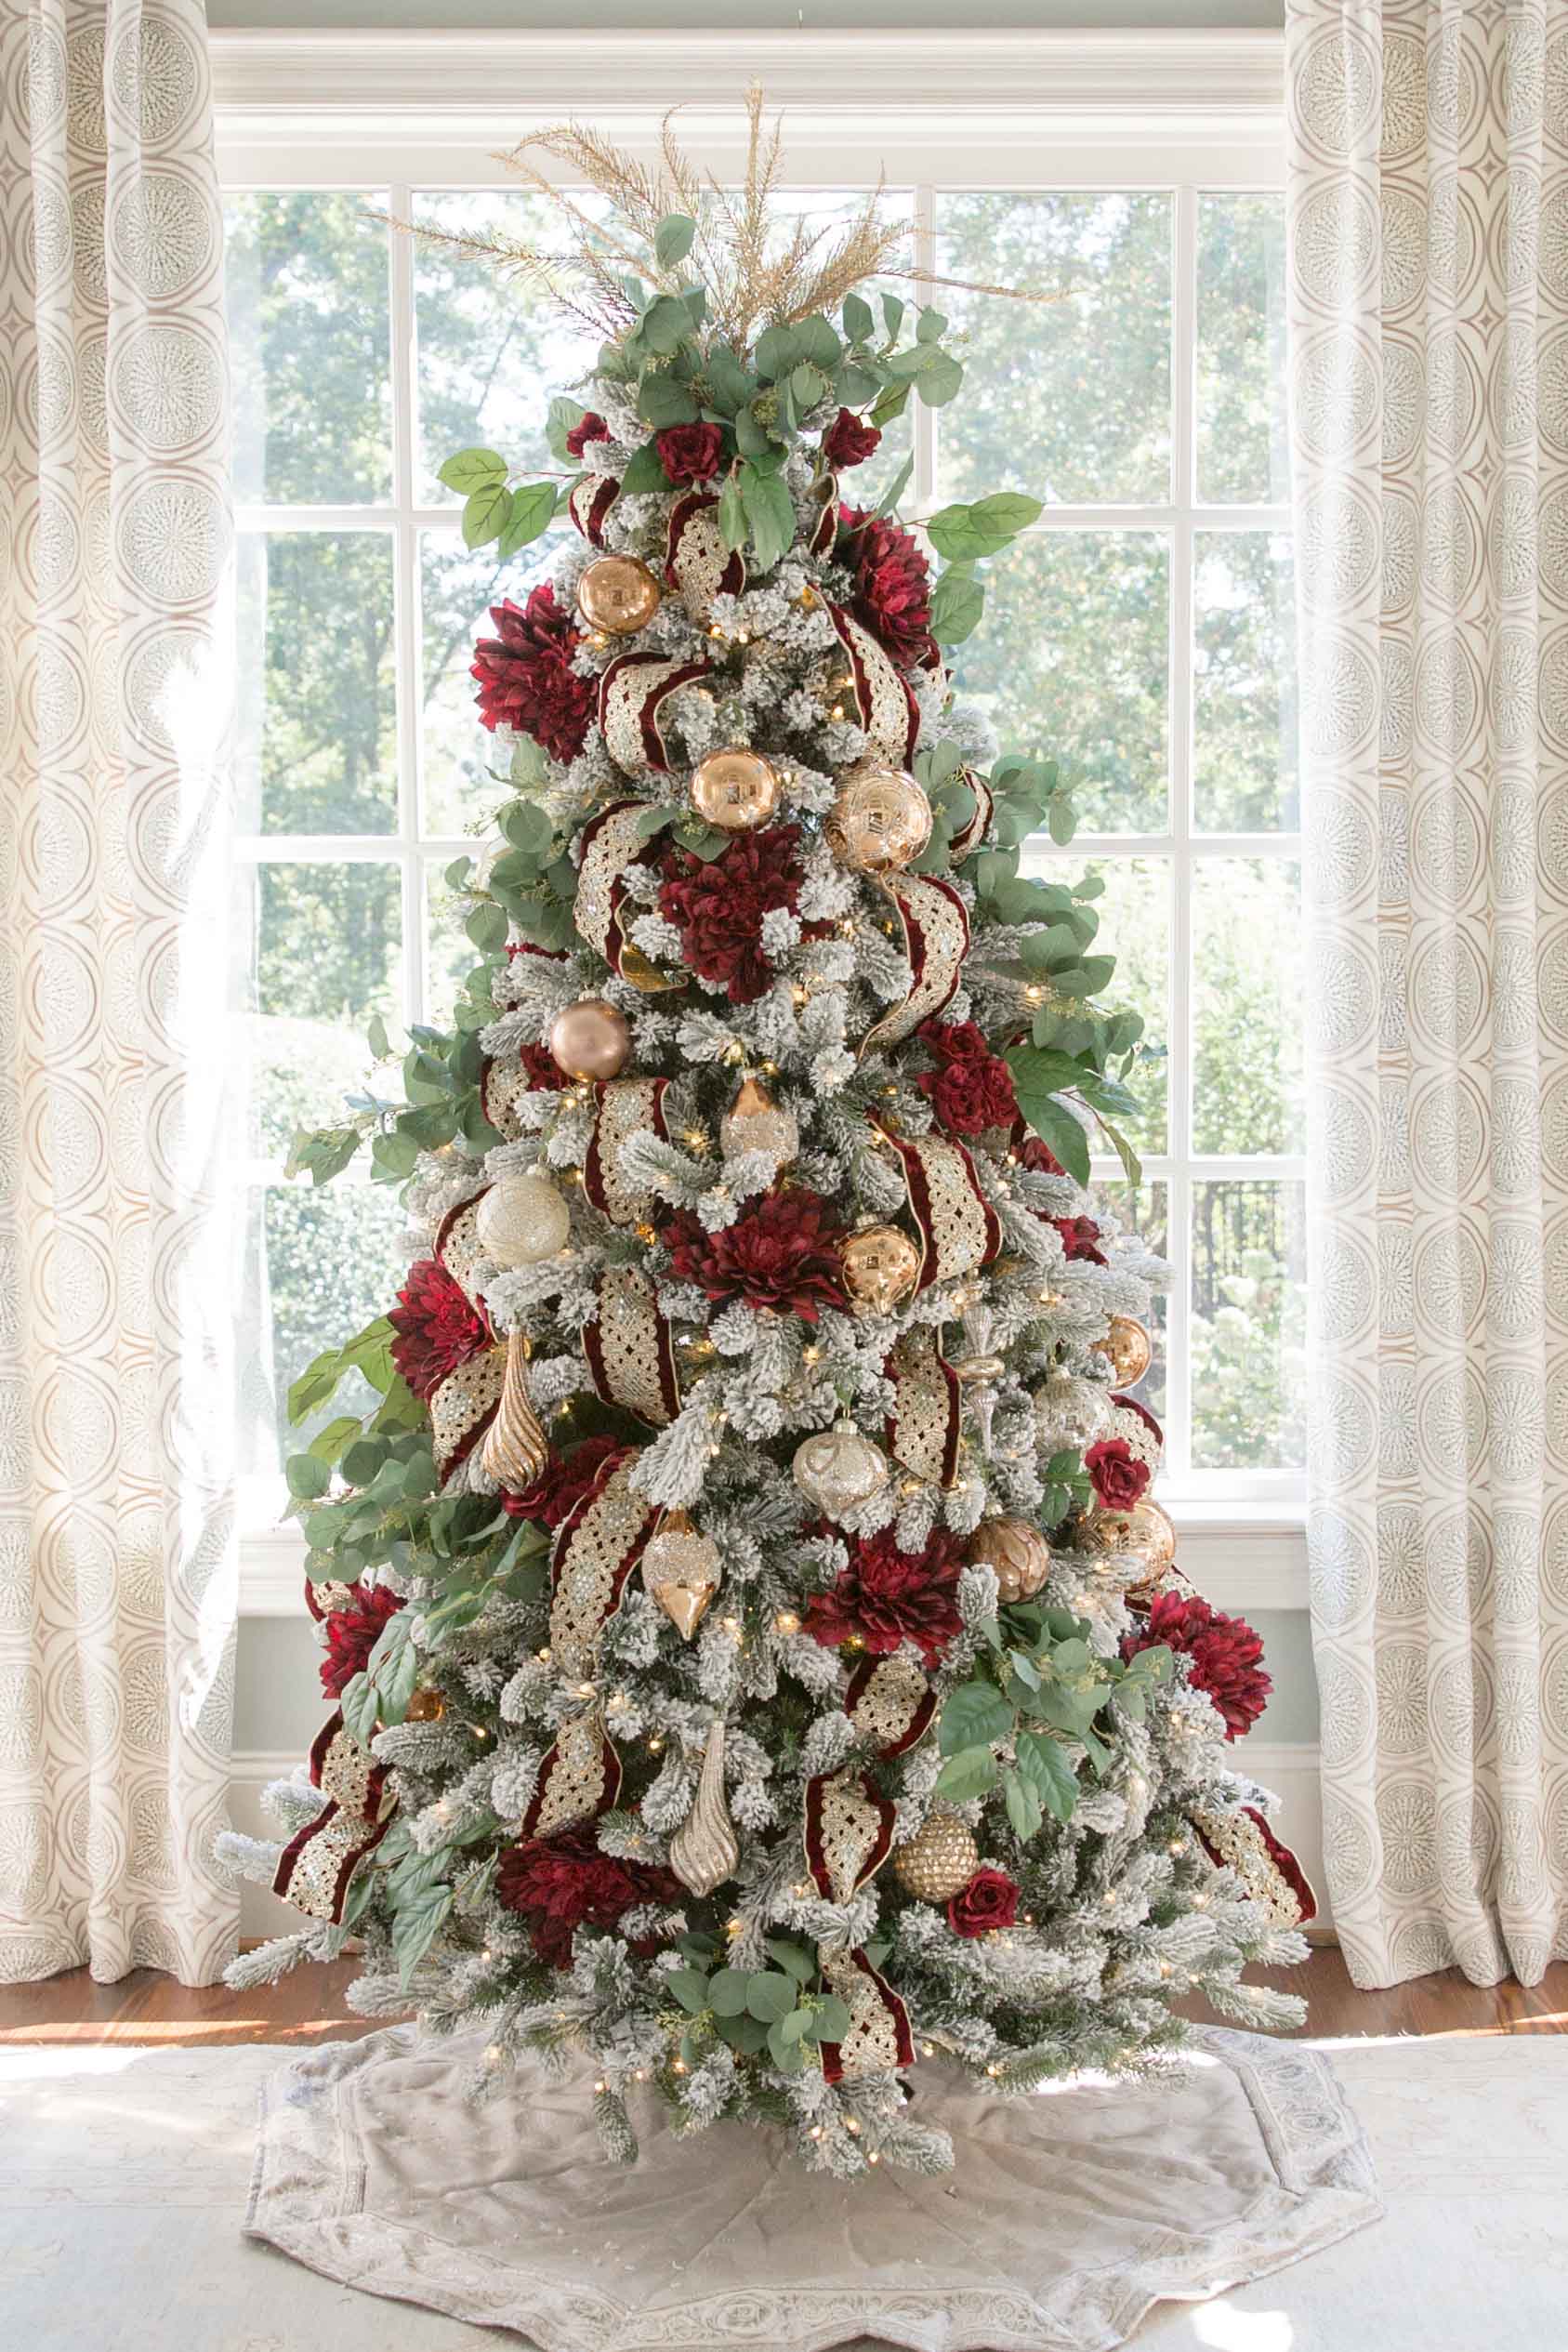 Red and Gold Christmas Tree. Intricate and ornate gold wired ribbon, dark red dahlias and deep red roses decorate this flocked tree in traditional colors. See two ways to decorate a flocked Christmas tree. More how to design a traditional tree posts coming soon!